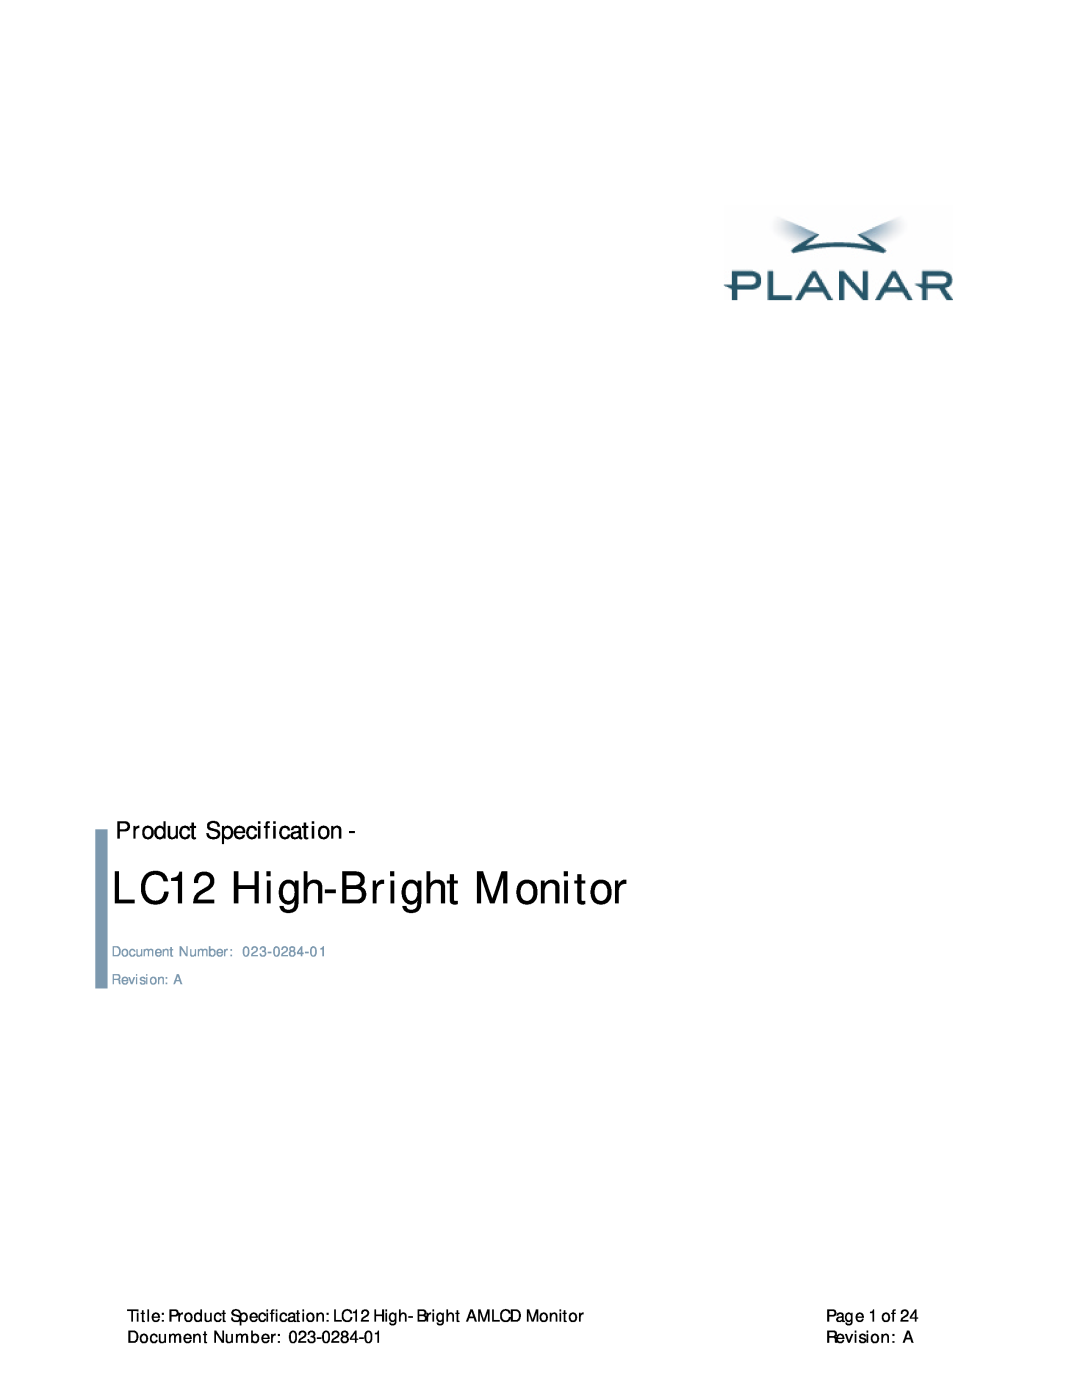 Planar manual LC12 High-Bright Monitor, Product Specification, Page 1 of, Document Number Revision A 